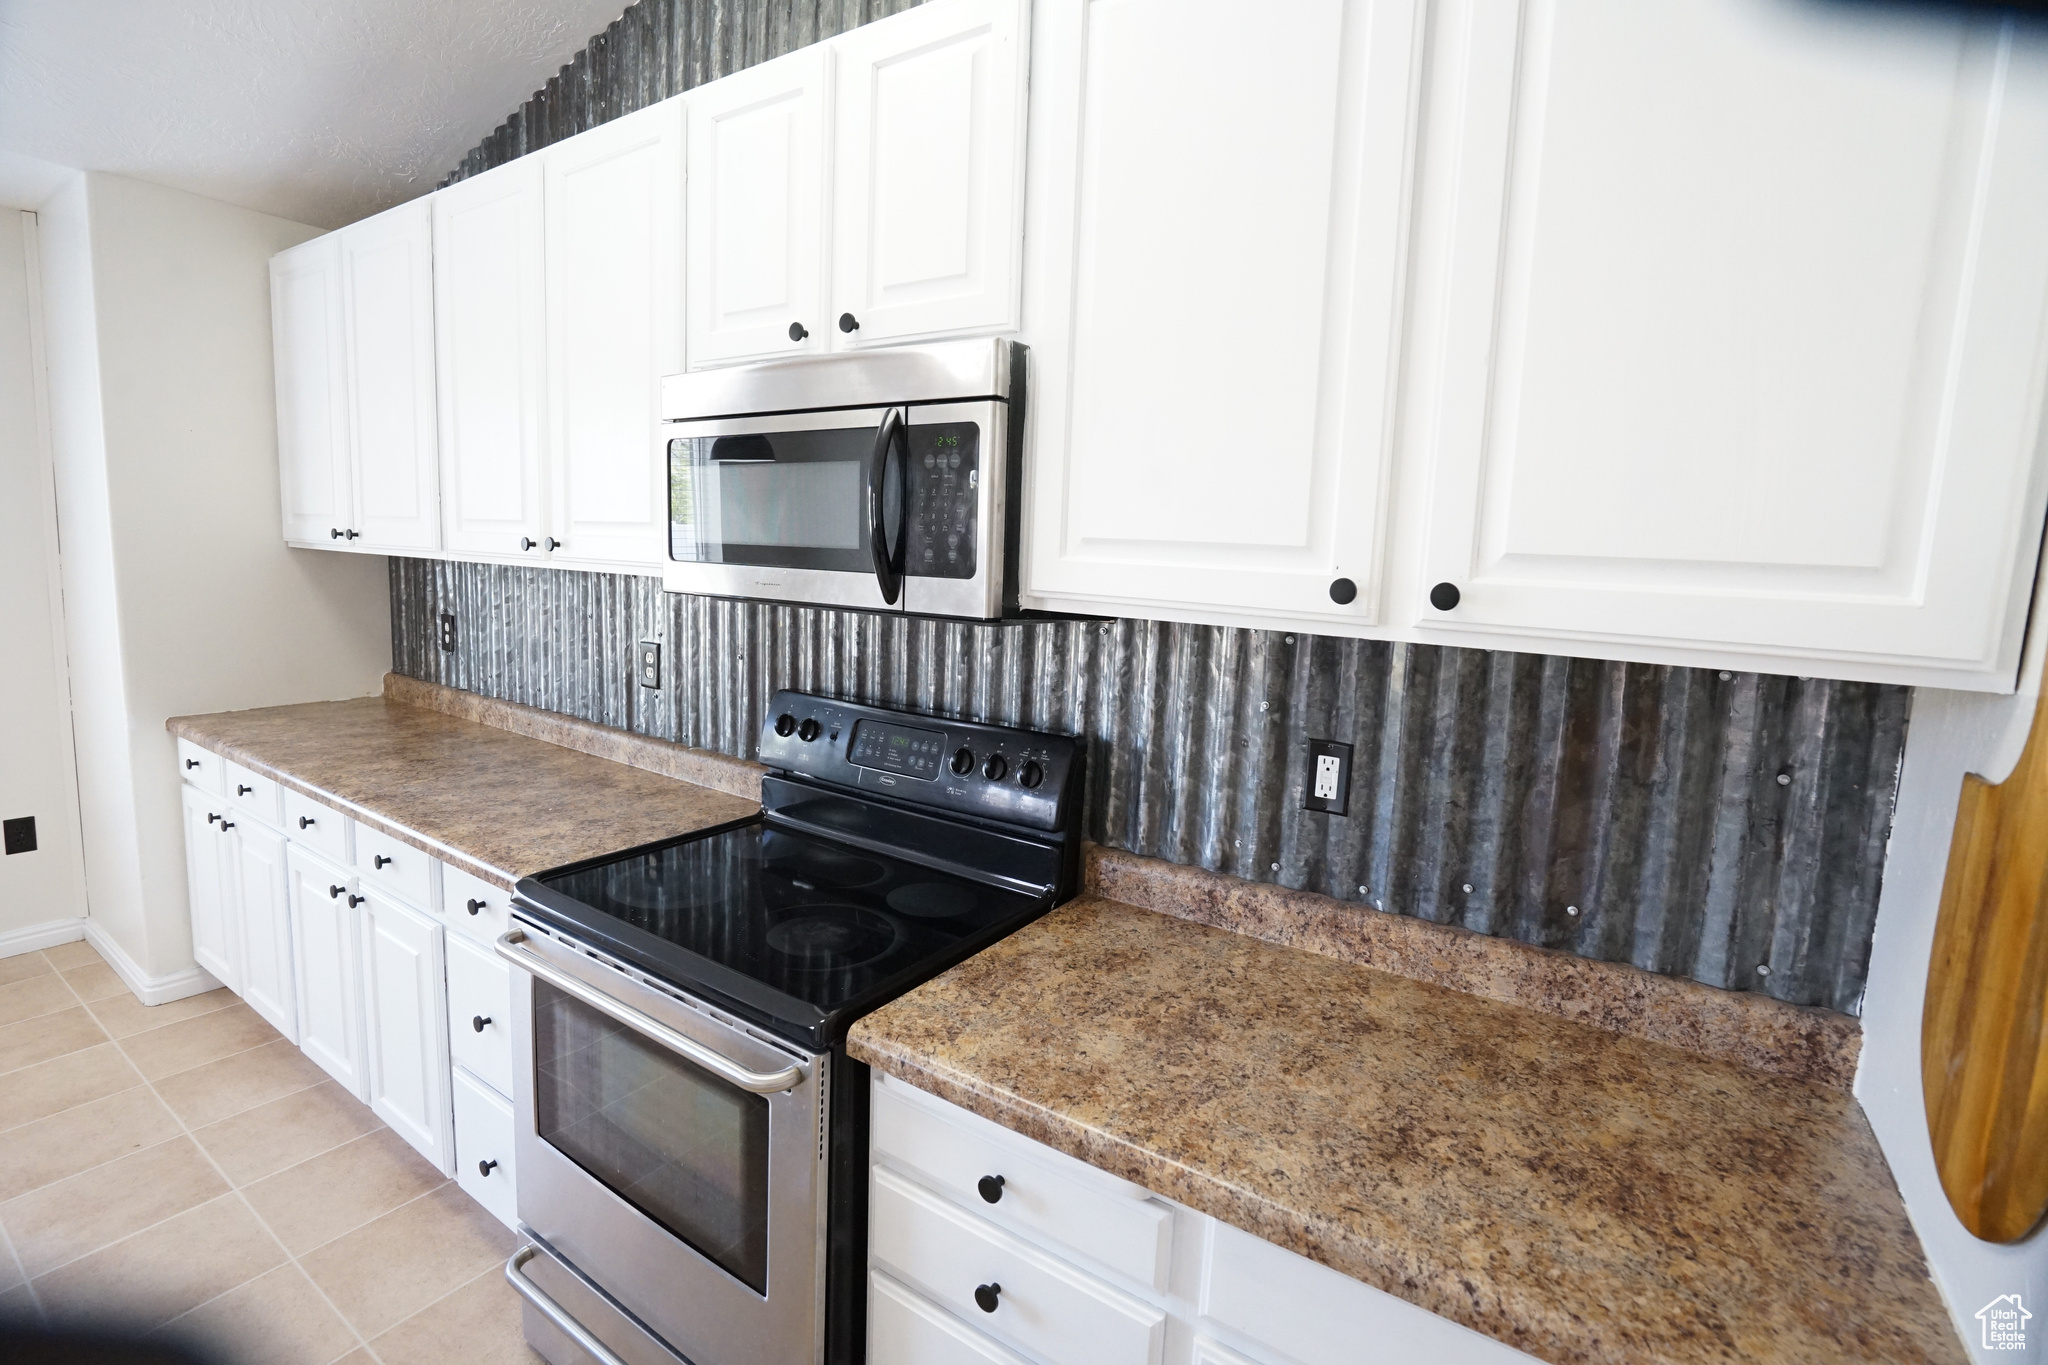 Kitchen with appliances with stainless steel finishes, tasteful backsplash, light tile floors, and white cabinetry